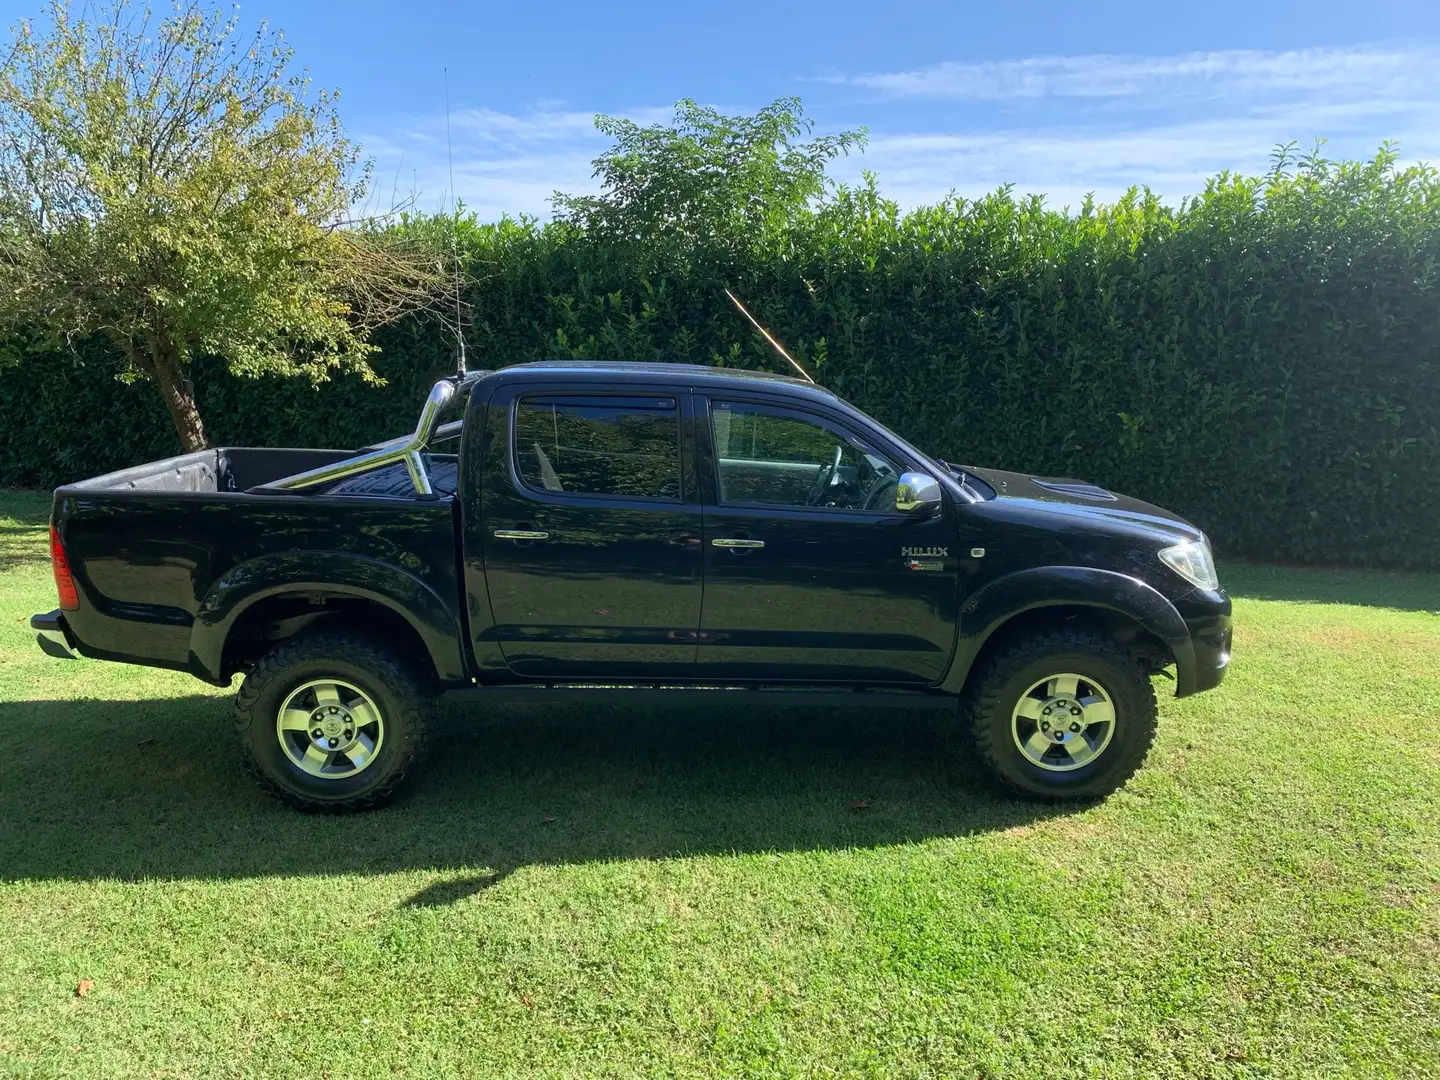 Toyota Hilux 3.0 double cab SR+ my11 Fekete - 1